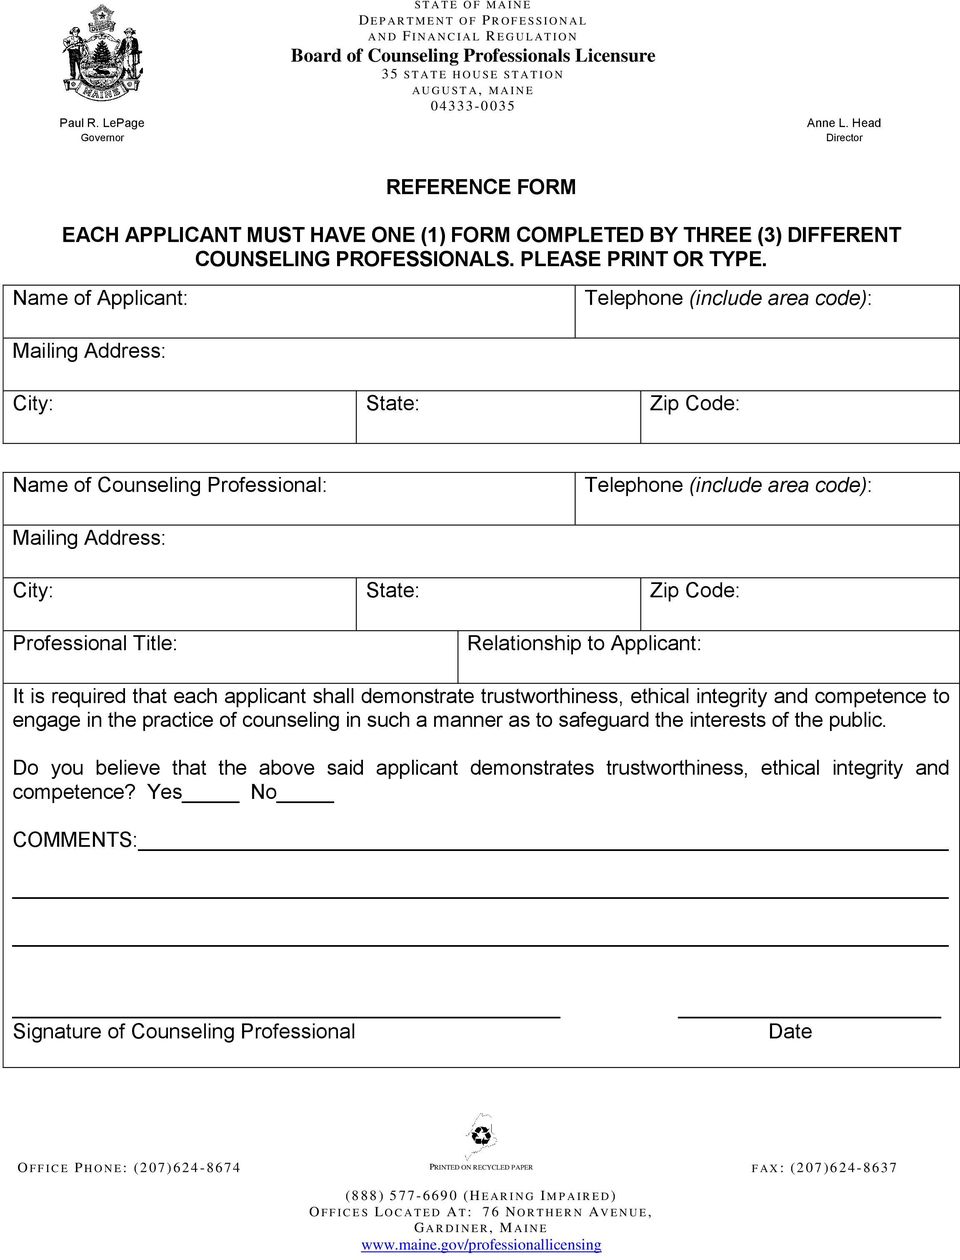 S T A T I O N A U G U S T A, M A I N E 04333-0 0 3 5 Anne L. Head Director REFERENCE FORM EACH APPLICANT MUST HAVE ONE (1) FORM COMPLETED BY THREE (3) DIFFERENT COUNSELING PROFESSIONALS.